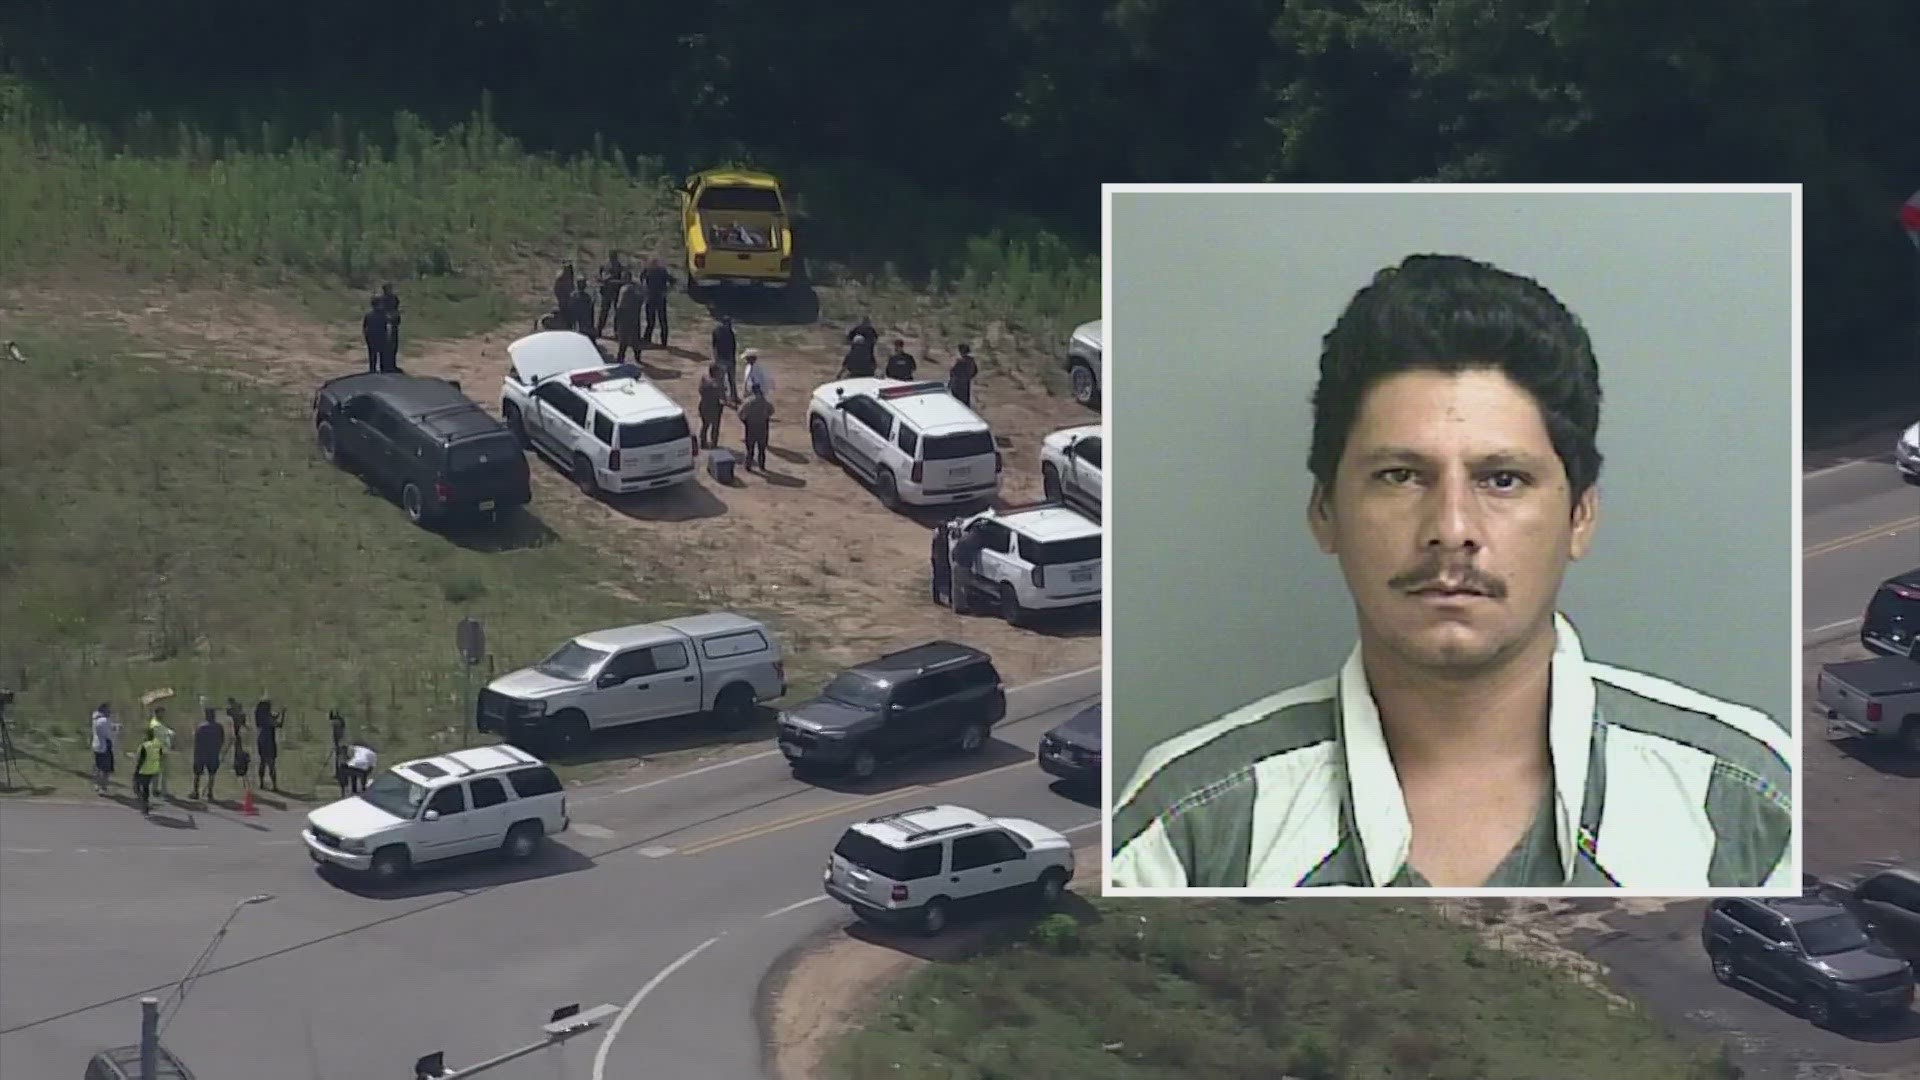 More than 200 law enforcement officers are searching for Francisco Oropeza, who's accused of killing five people in San Jacinto County late Friday night.